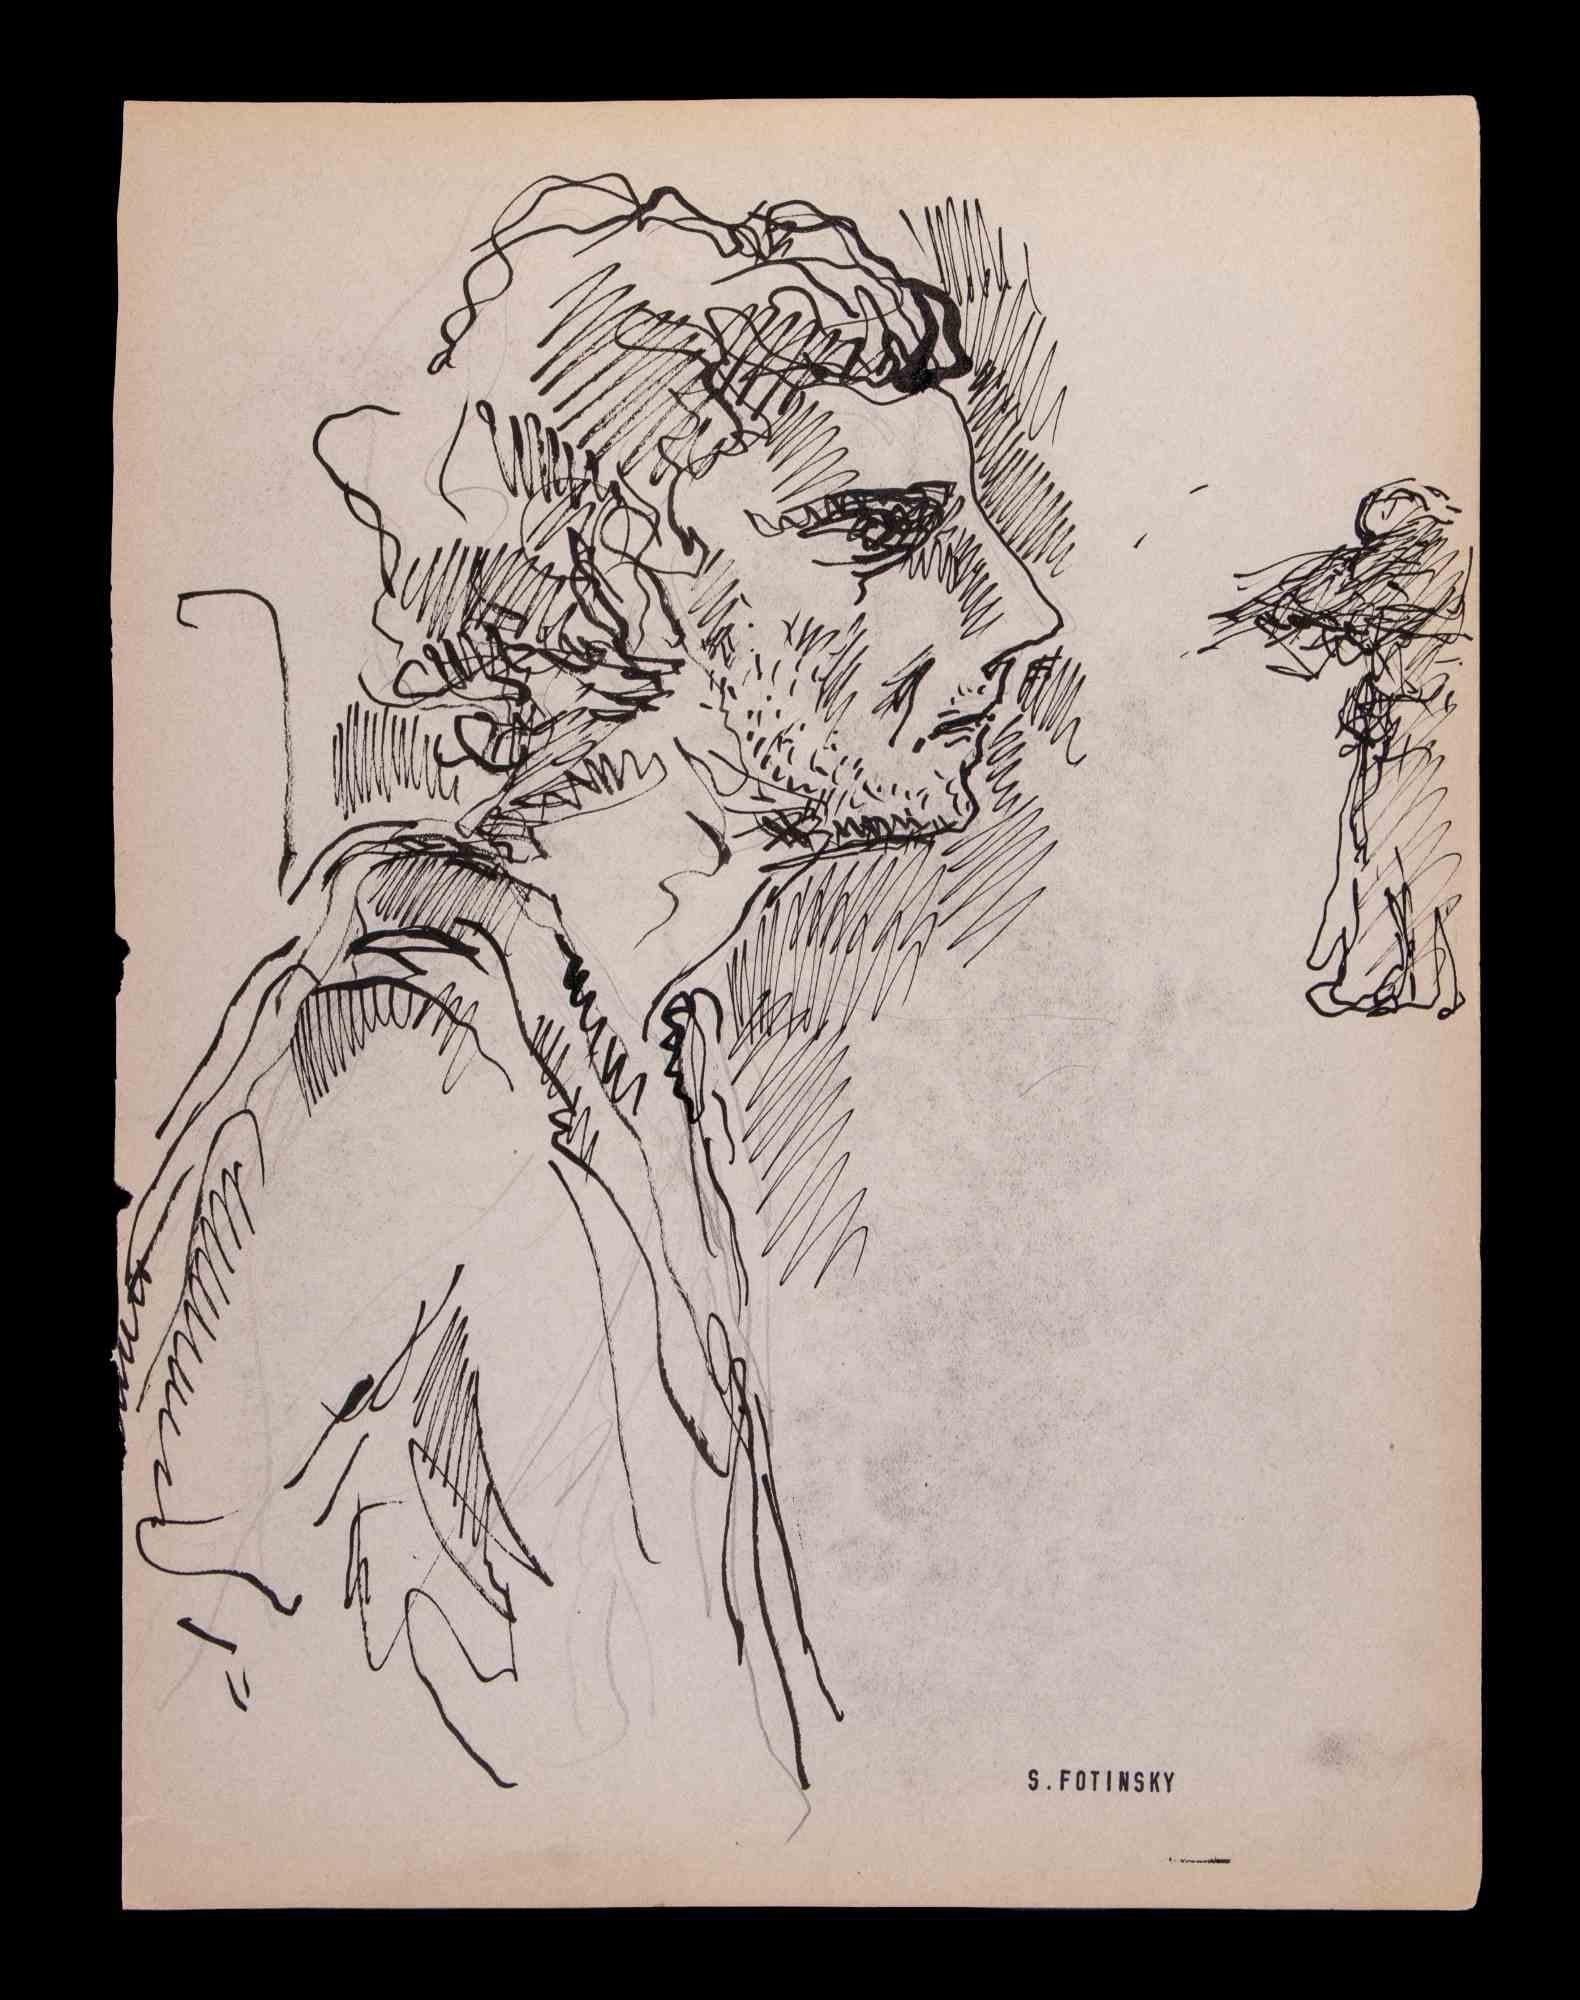 A Man's Profile - Drawing by Serge Fotisnky - 1947